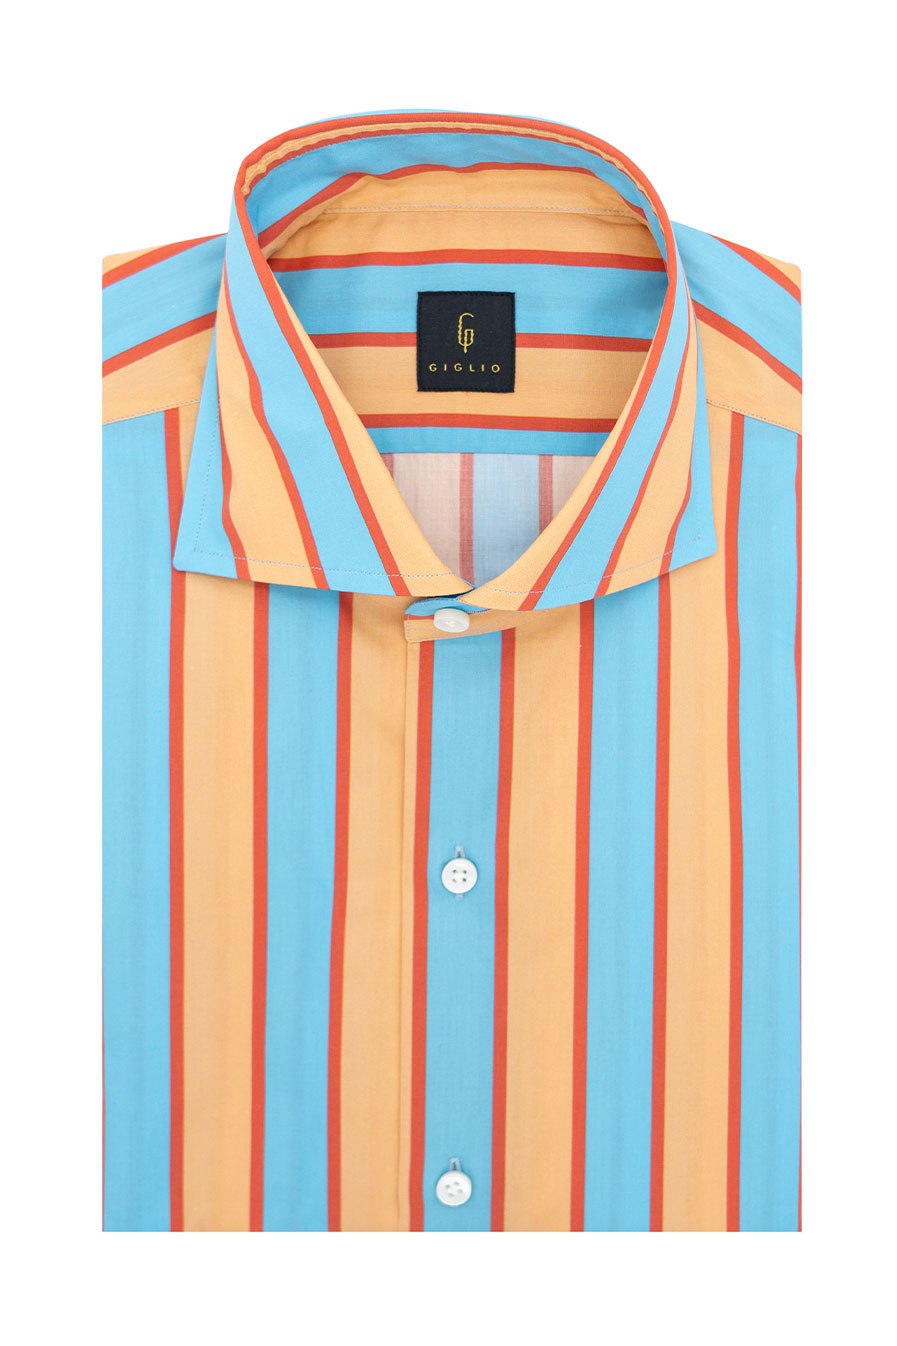 turquoise & salmon colored striped button down men's shirt, folded